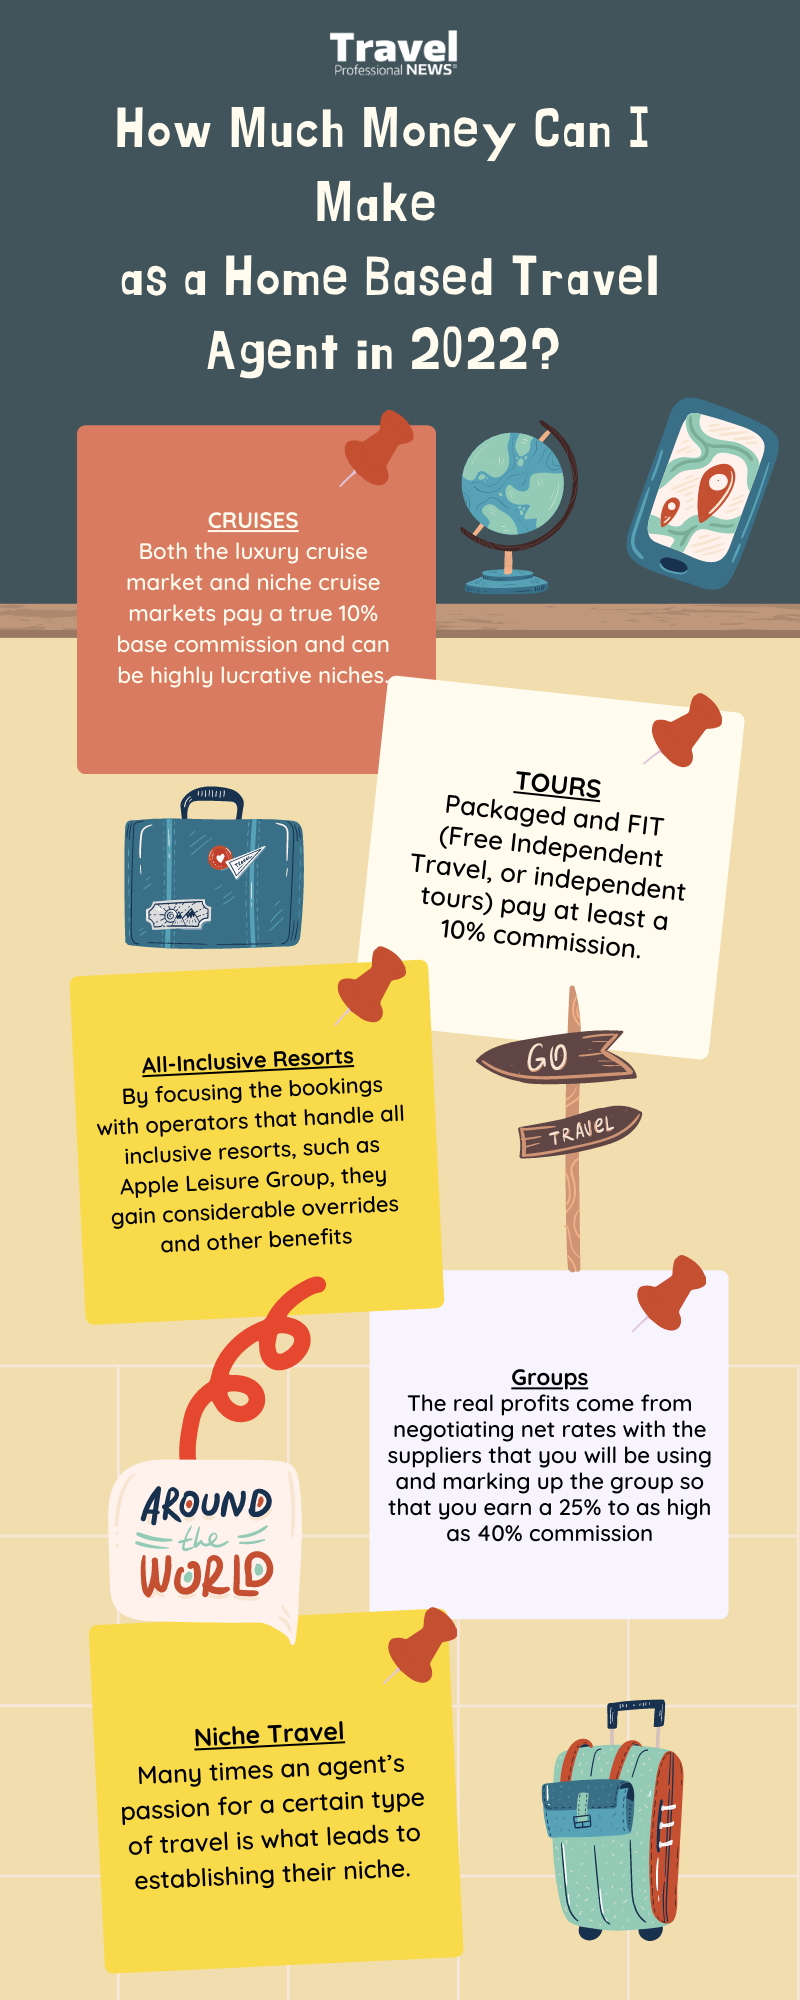 How-Much-Money-Can-I-Make-as-a-Home-Based-Travel-Agent-in-2022-Infographic-1-TPN